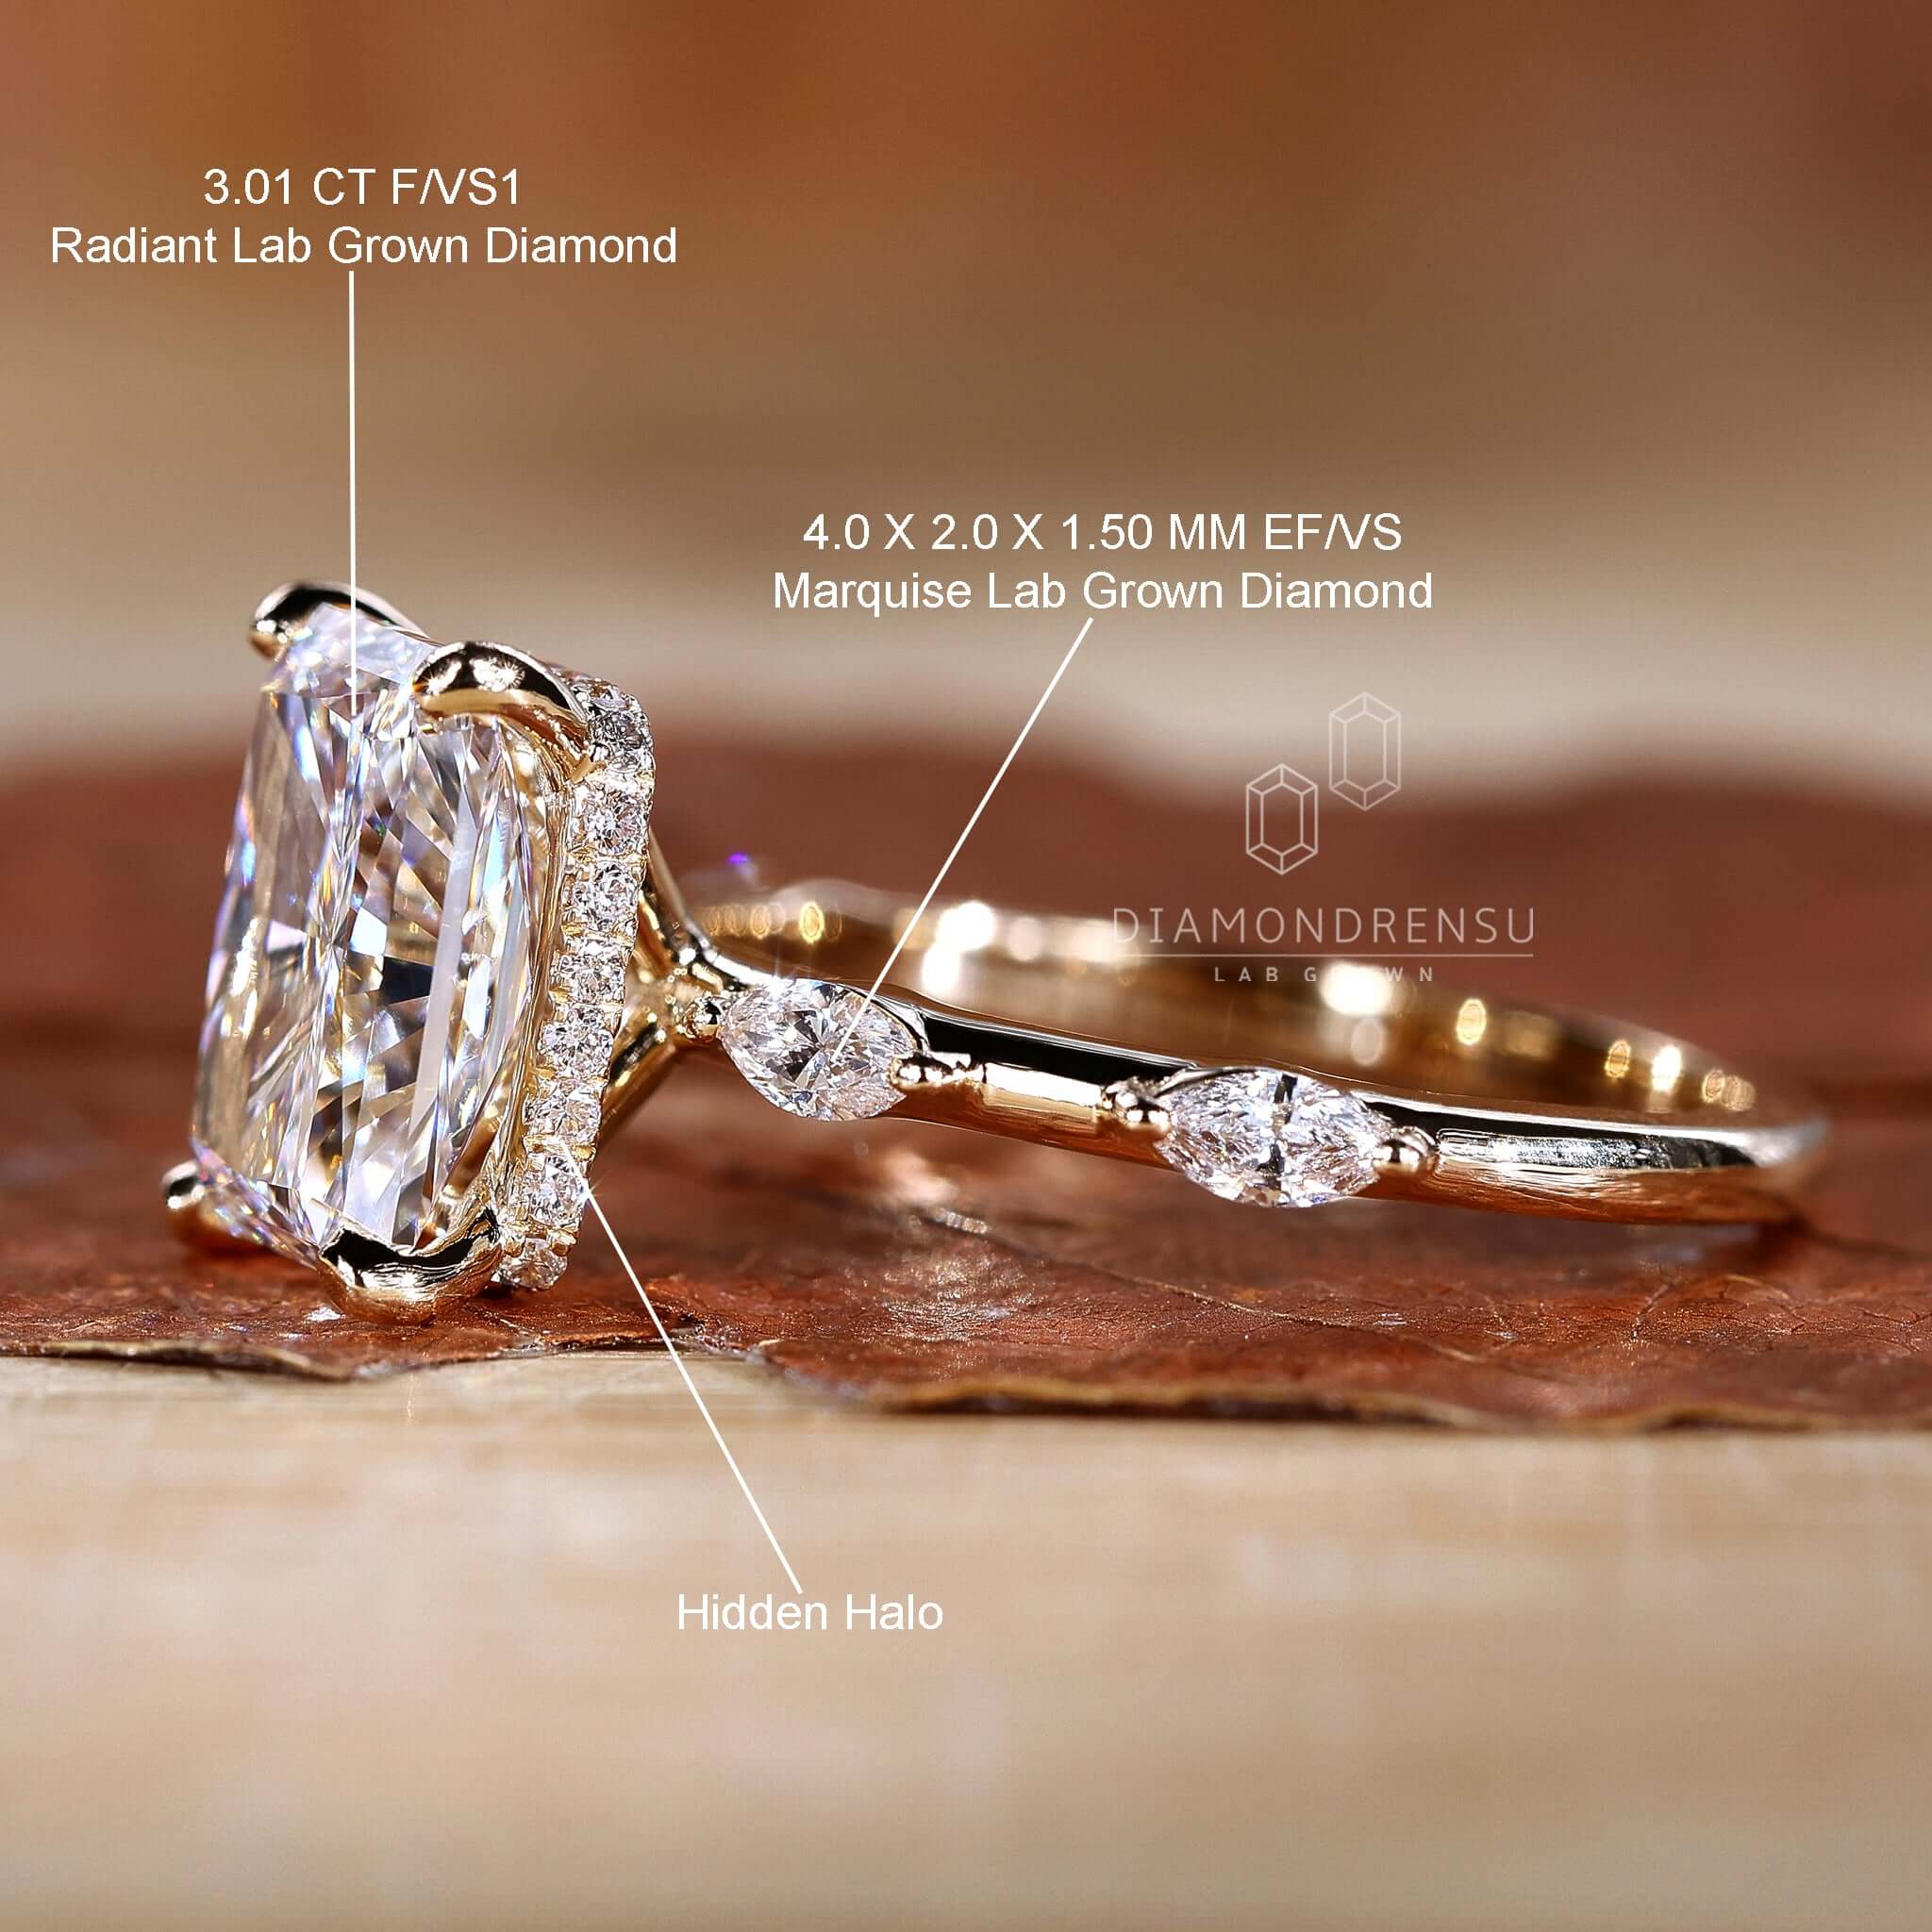 Elegant hand showcasing a radiant cut ring, capturing its distinct and luxurious style